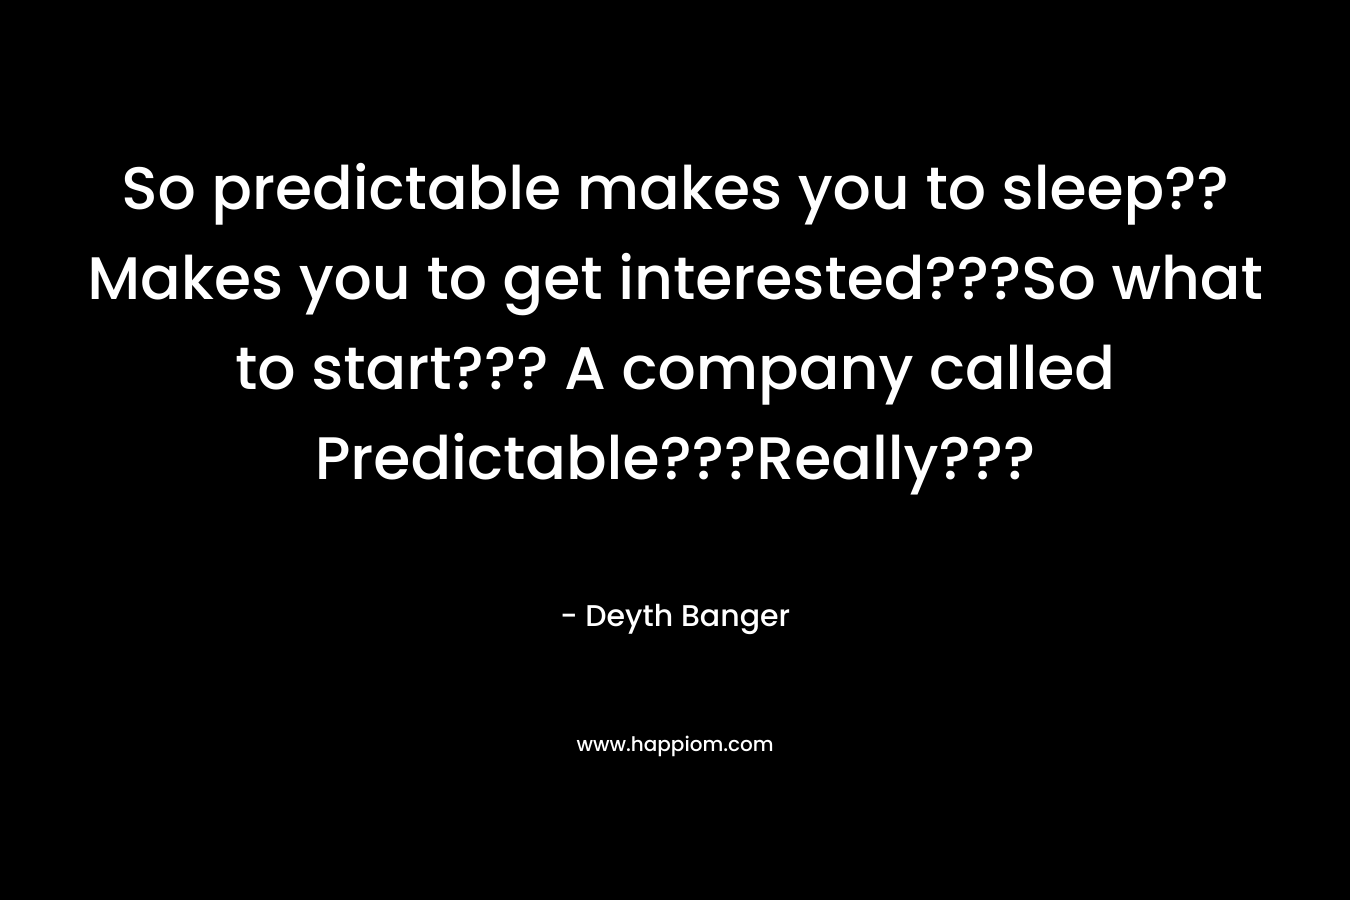 So predictable makes you to sleep??Makes you to get interested???So what to start??? A company called Predictable???Really??? – Deyth Banger